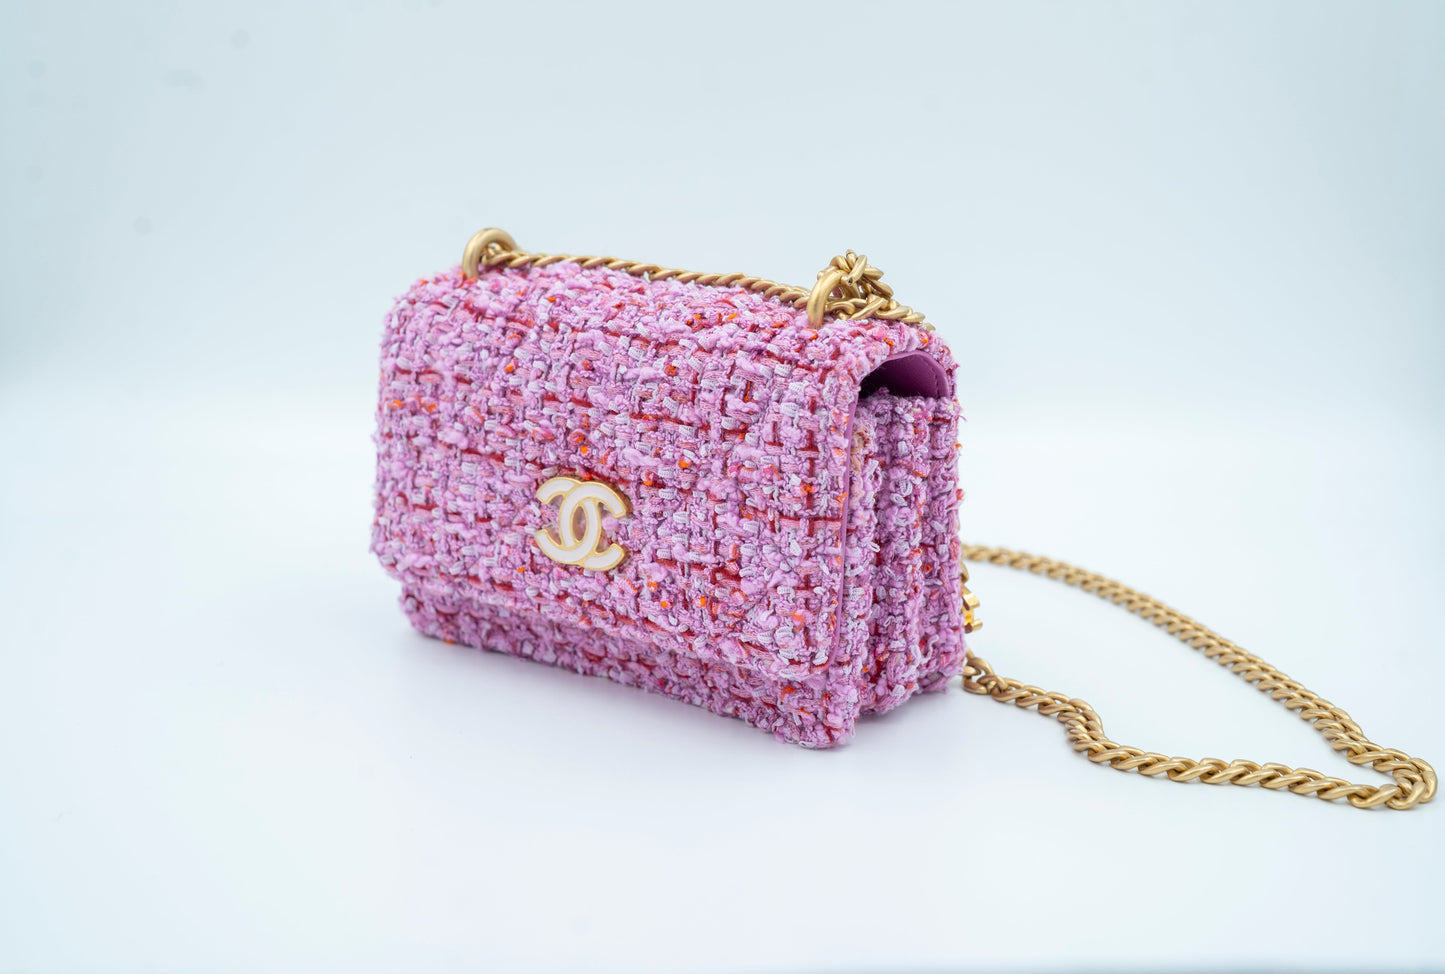 CHANEL 22P SQUARE FLAP BAG TWEED PINK WITH PINK HARDWARE